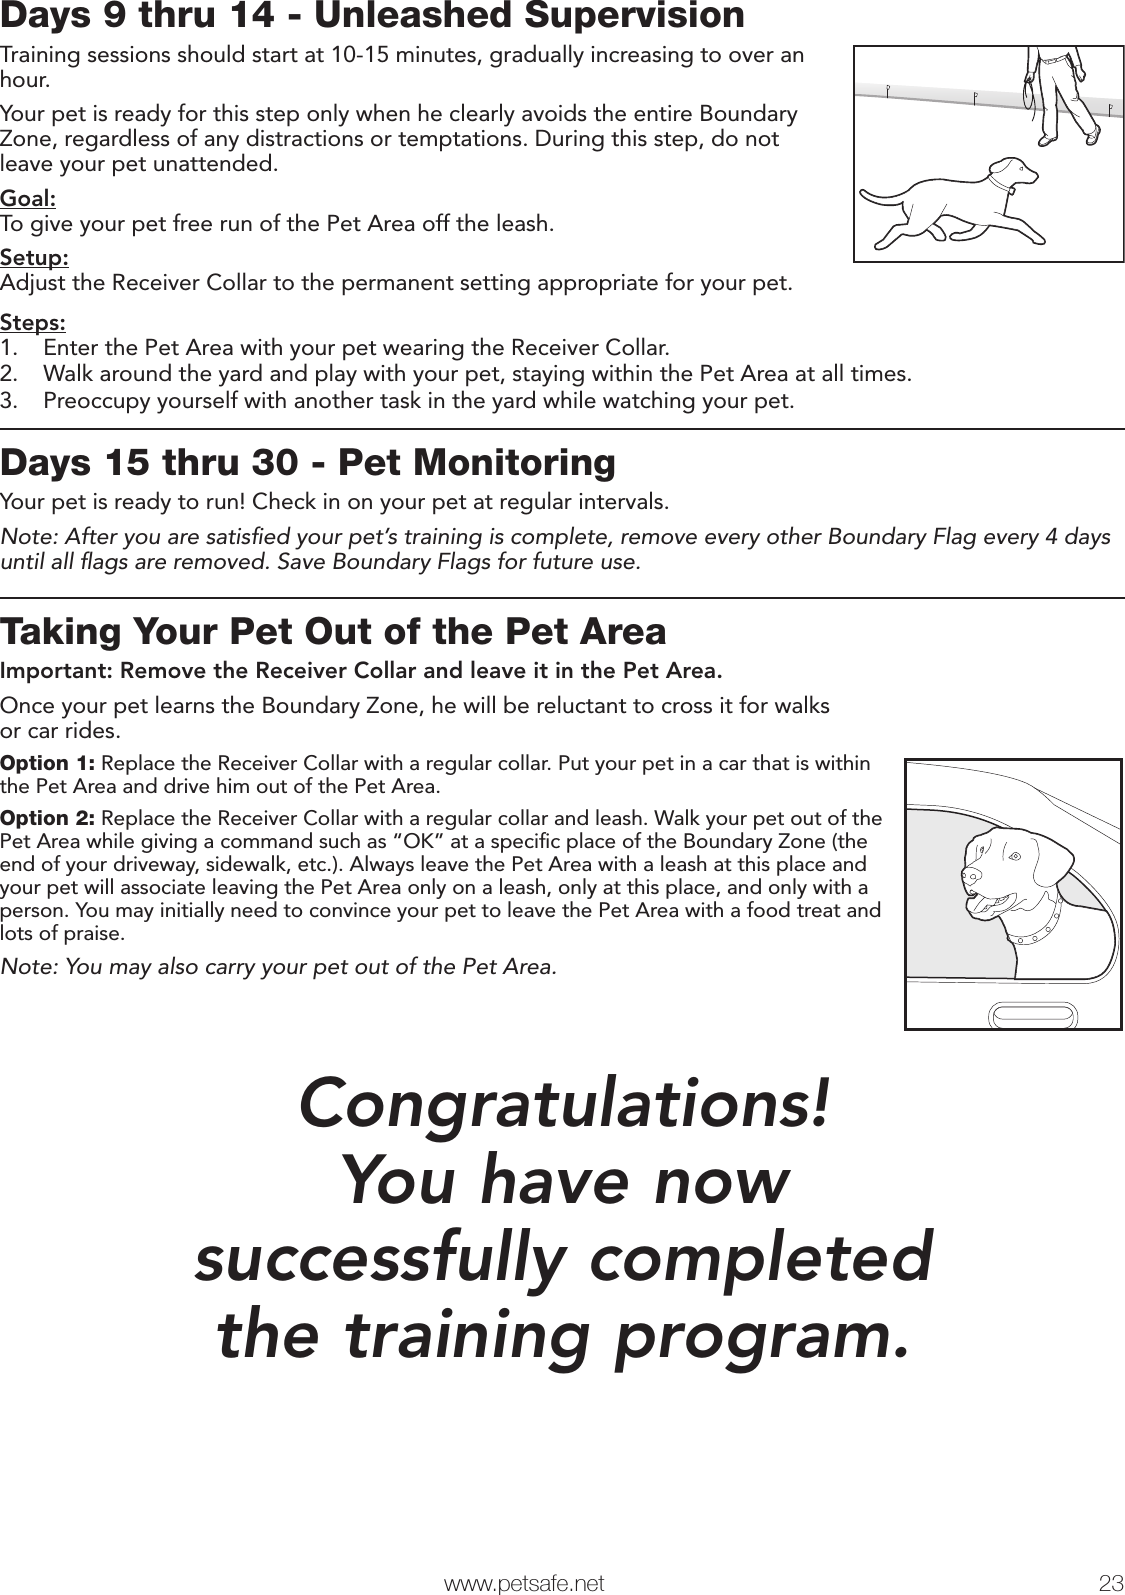   www.petsafe.net 23 Days 9 thru 14 - Unleashed SupervisionTraining sessions should start at 10-15 minutes, gradually increasing to over an hour.Your pet is ready for this step only when he clearly avoids the entire Boundary Zone, regardless of any distractions or temptations. During this step, do not leave your pet unattended. Goal:To give your pet free run of the Pet Area off the leash. Setup:Adjust the Receiver Collar to the permanent setting appropriate for your pet.Steps:1.  Enter the Pet Area with your pet wearing the Receiver Collar. 2.  Walk around the yard and play with your pet, staying within the Pet Area at all times.3.  Preoccupy yourself with another task in the yard while watching your pet.Days 15 thru 30 - Pet MonitoringYour pet is ready to run! Check in on your pet at regular intervals.Note: After you are satisﬁed your pet’s training is complete, remove every other Boundary Flag every 4 days until all ﬂags are removed. Save Boundary Flags for future use.Taking Your Pet Out of the Pet AreaImportant: Remove the Receiver Collar and leave it in the Pet Area.Once your pet learns the Boundary Zone, he will be reluctant to cross it for walks or car rides. Option 1: Replace the Receiver Collar with a regular collar. Put your pet in a car that is within the Pet Area and drive him out of the Pet Area.Option 2: Replace the Receiver Collar with a regular collar and leash. Walk your pet out of the Pet Area while giving a command such as “OK” at a speciﬁc place of the Boundary Zone (the end of your driveway, sidewalk, etc.). Always leave the Pet Area with a leash at this place and your pet will associate leaving the Pet Area only on a leash, only at this place, and only with a person. You may initially need to convince your pet to leave the Pet Area with a food treat and lots of praise.Note: You may also carry your pet out of the Pet Area.Congratulations! You have now successfully completed the training program.Phase 4Phase 5